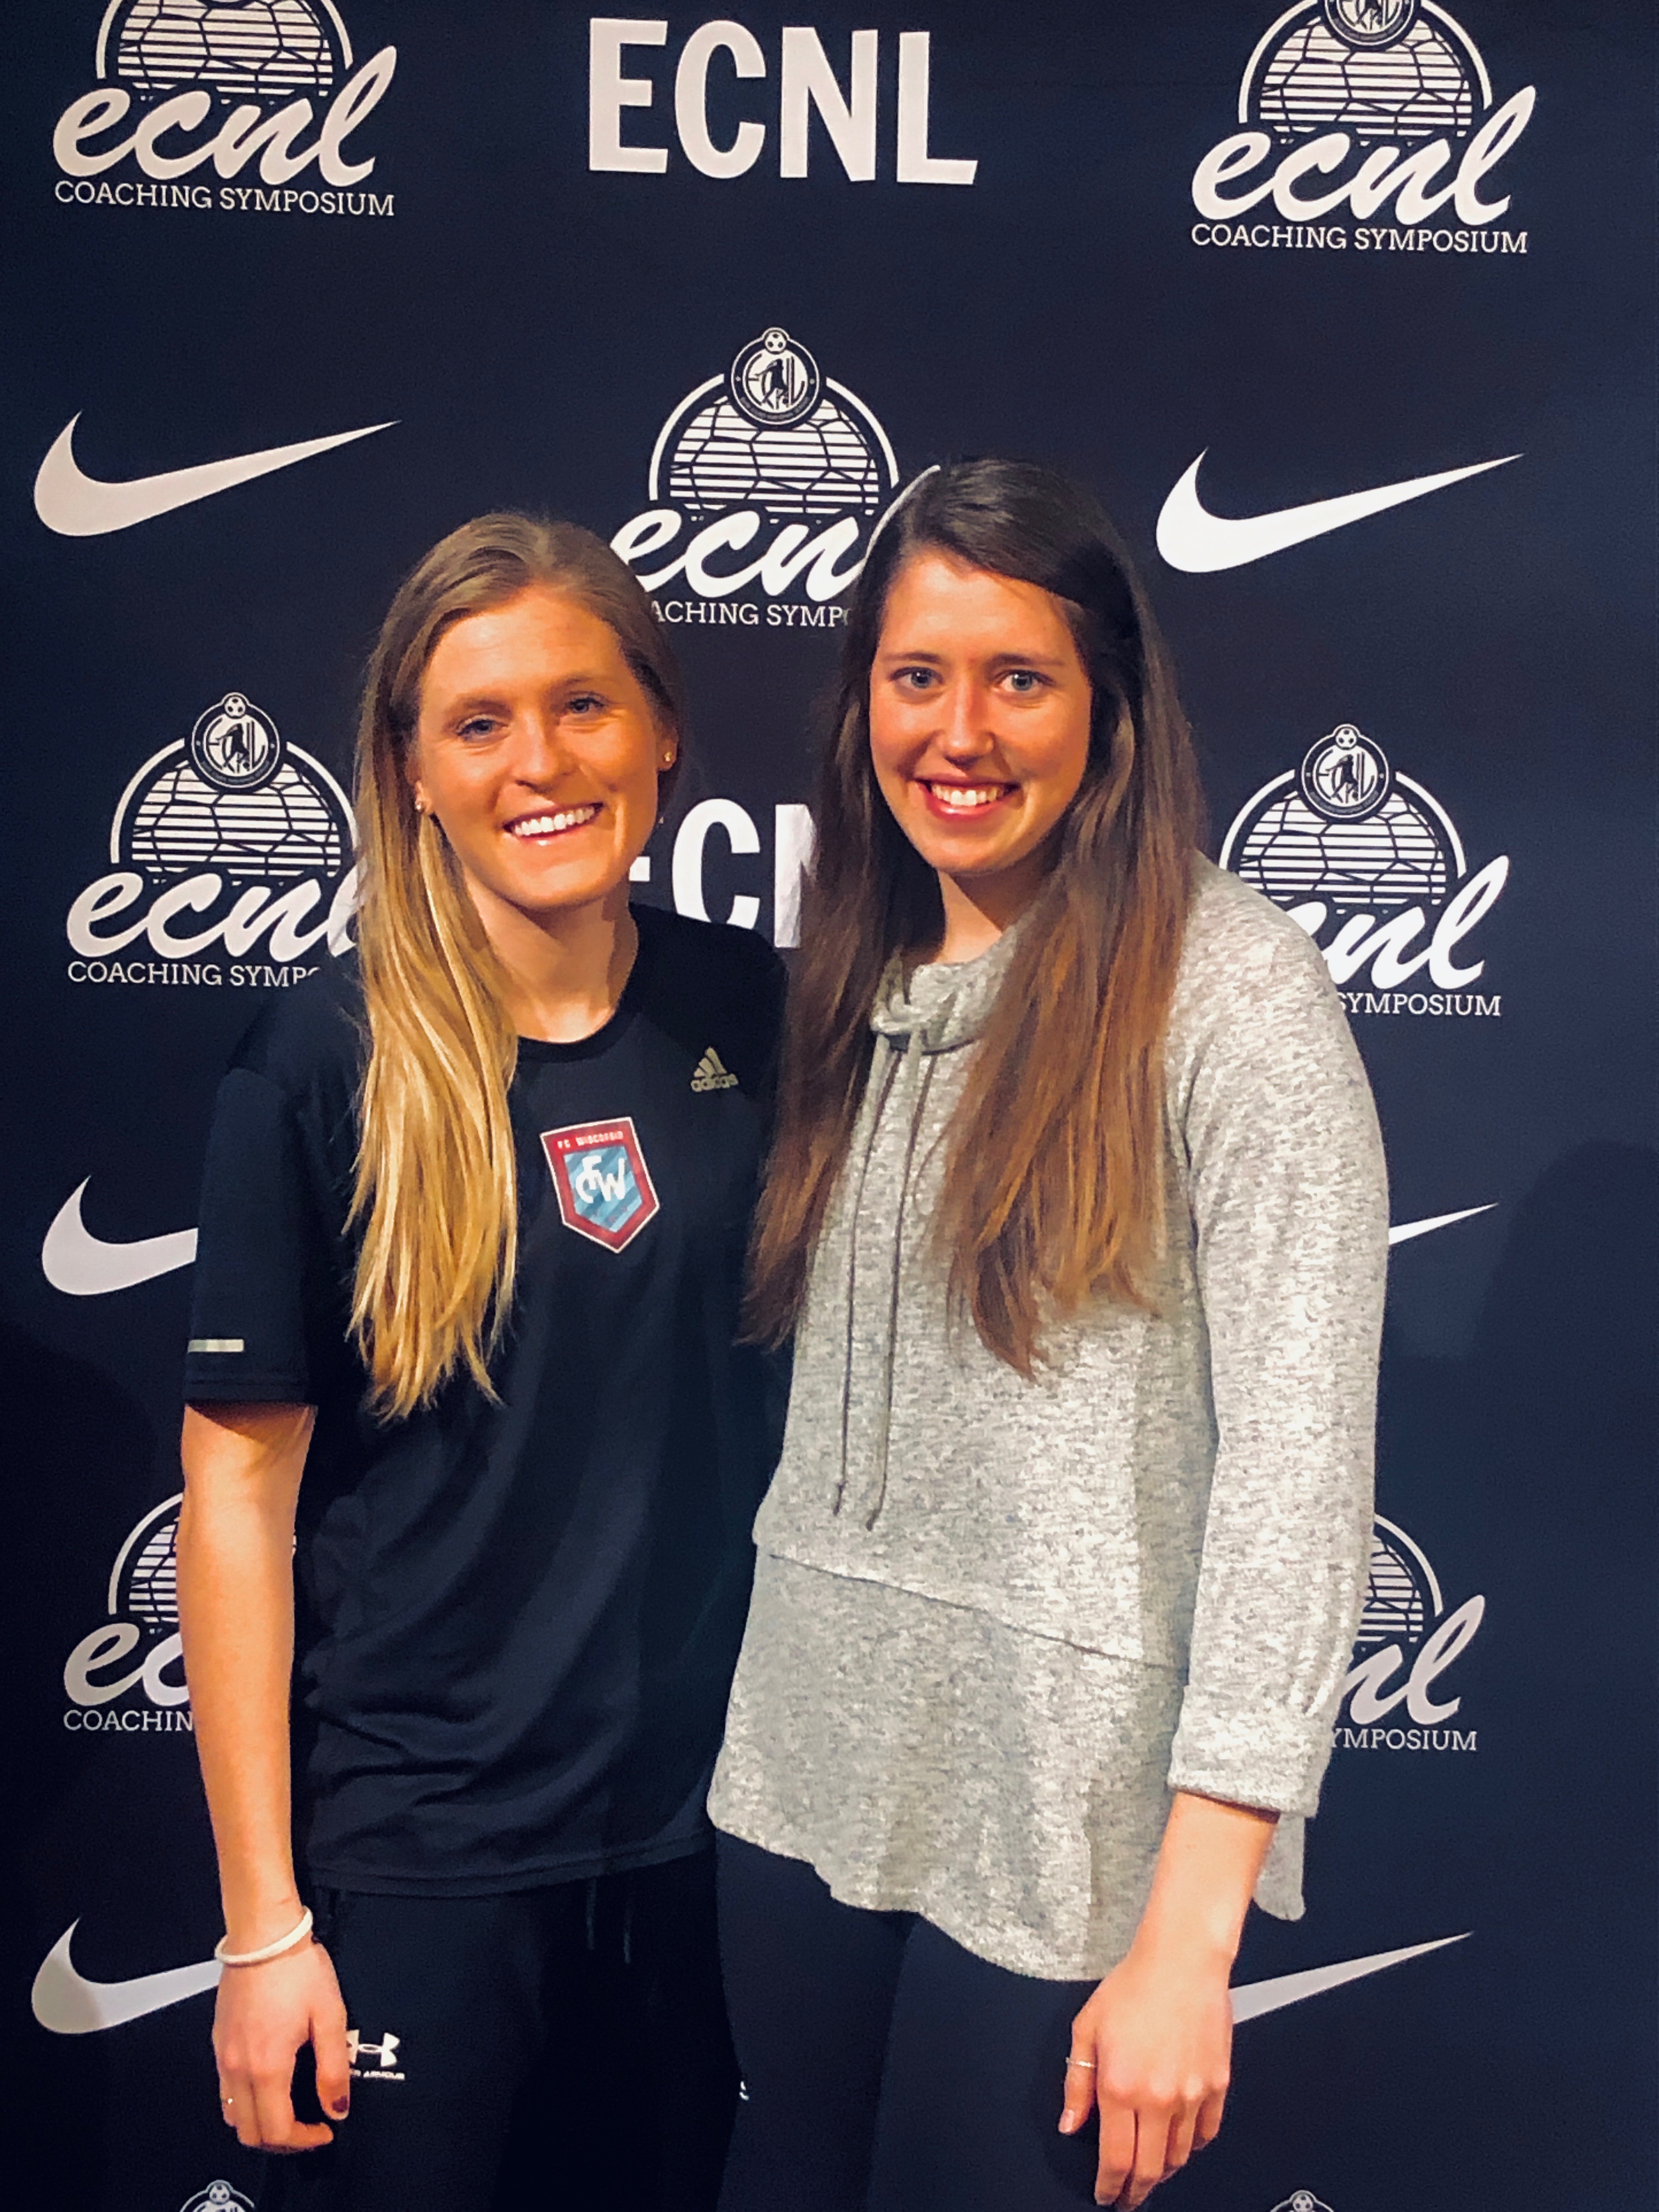 FC Wisconsin Coaches Attend 2019 ECNL Coaching Symposium